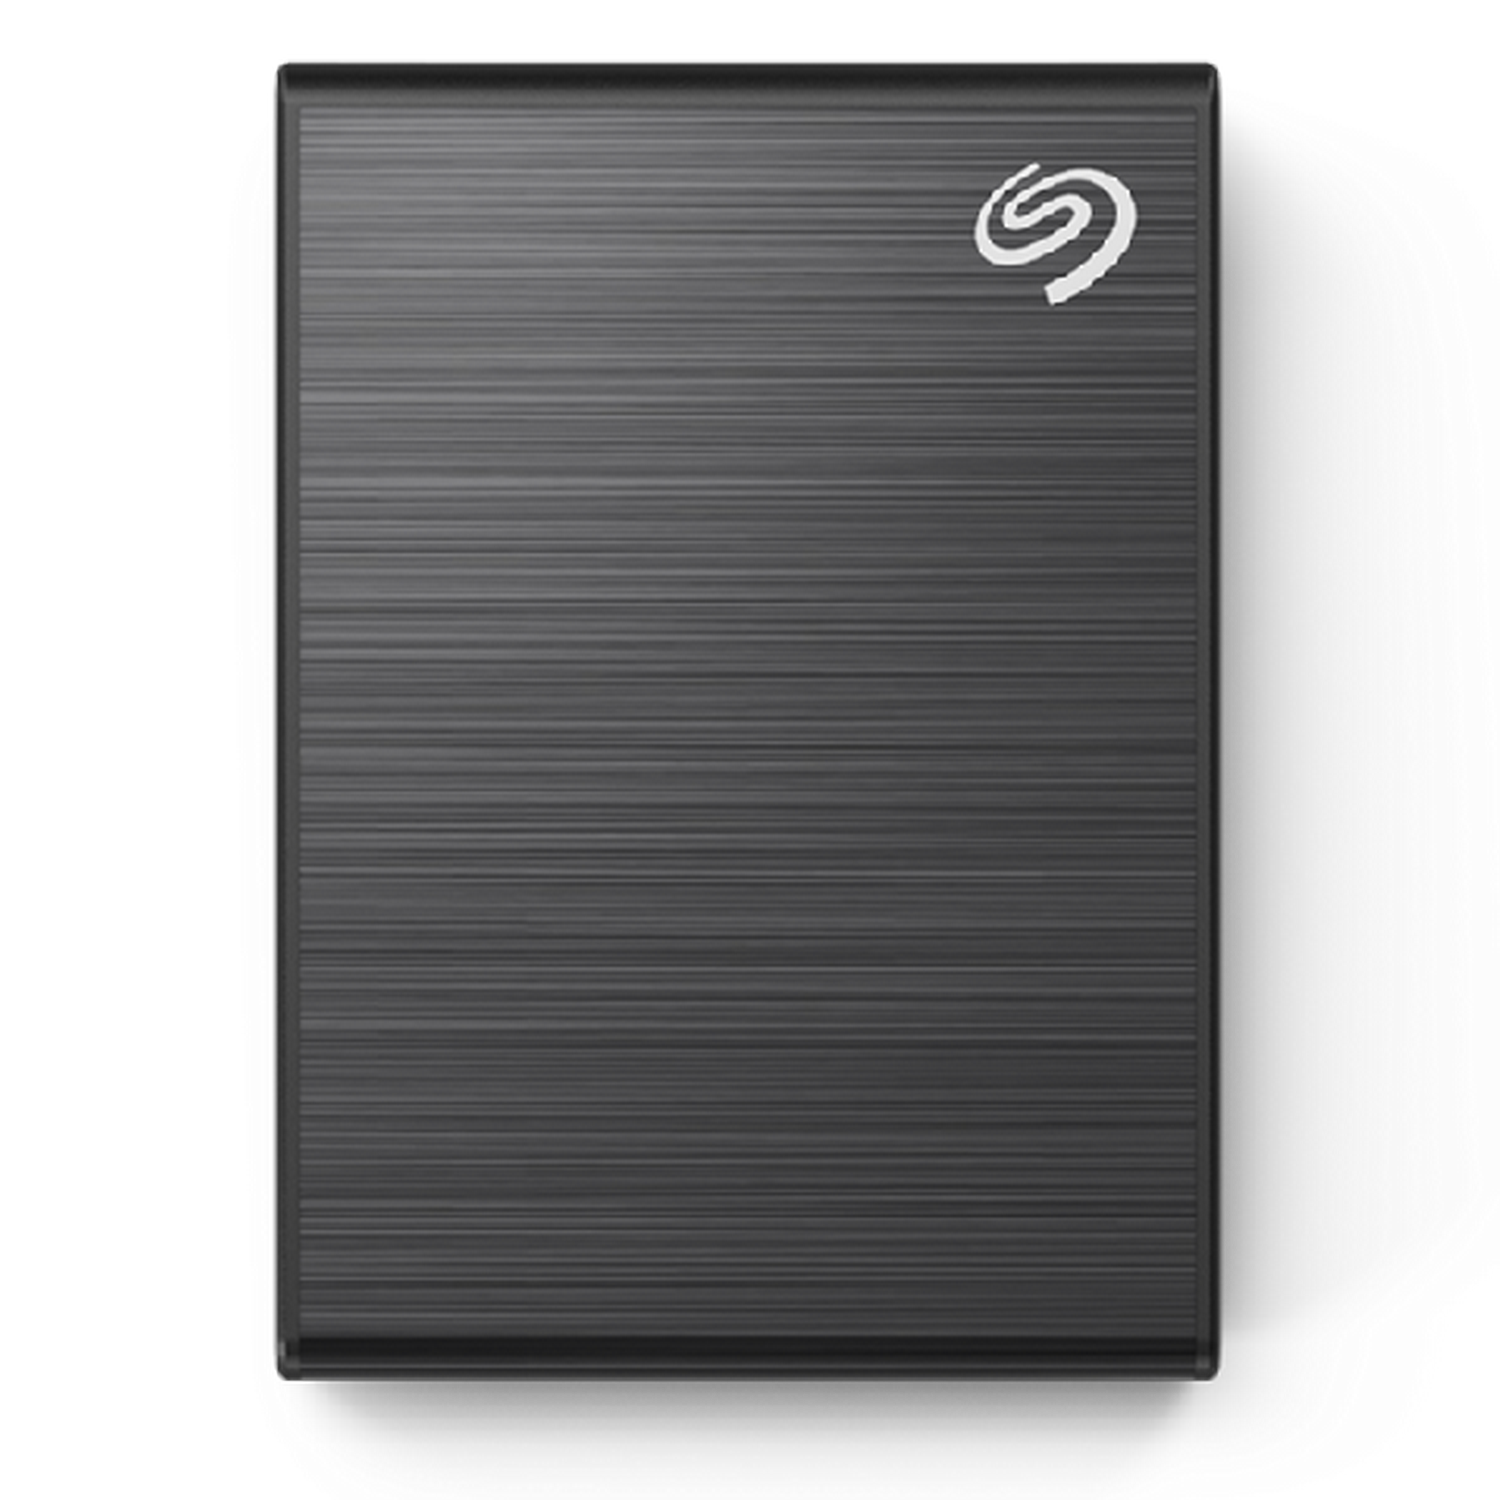 Ssd Externo 500 gb seagate one touch stkg500400 1030 mbs plug play negro disco duro technology 2.5 unidad de 500gb